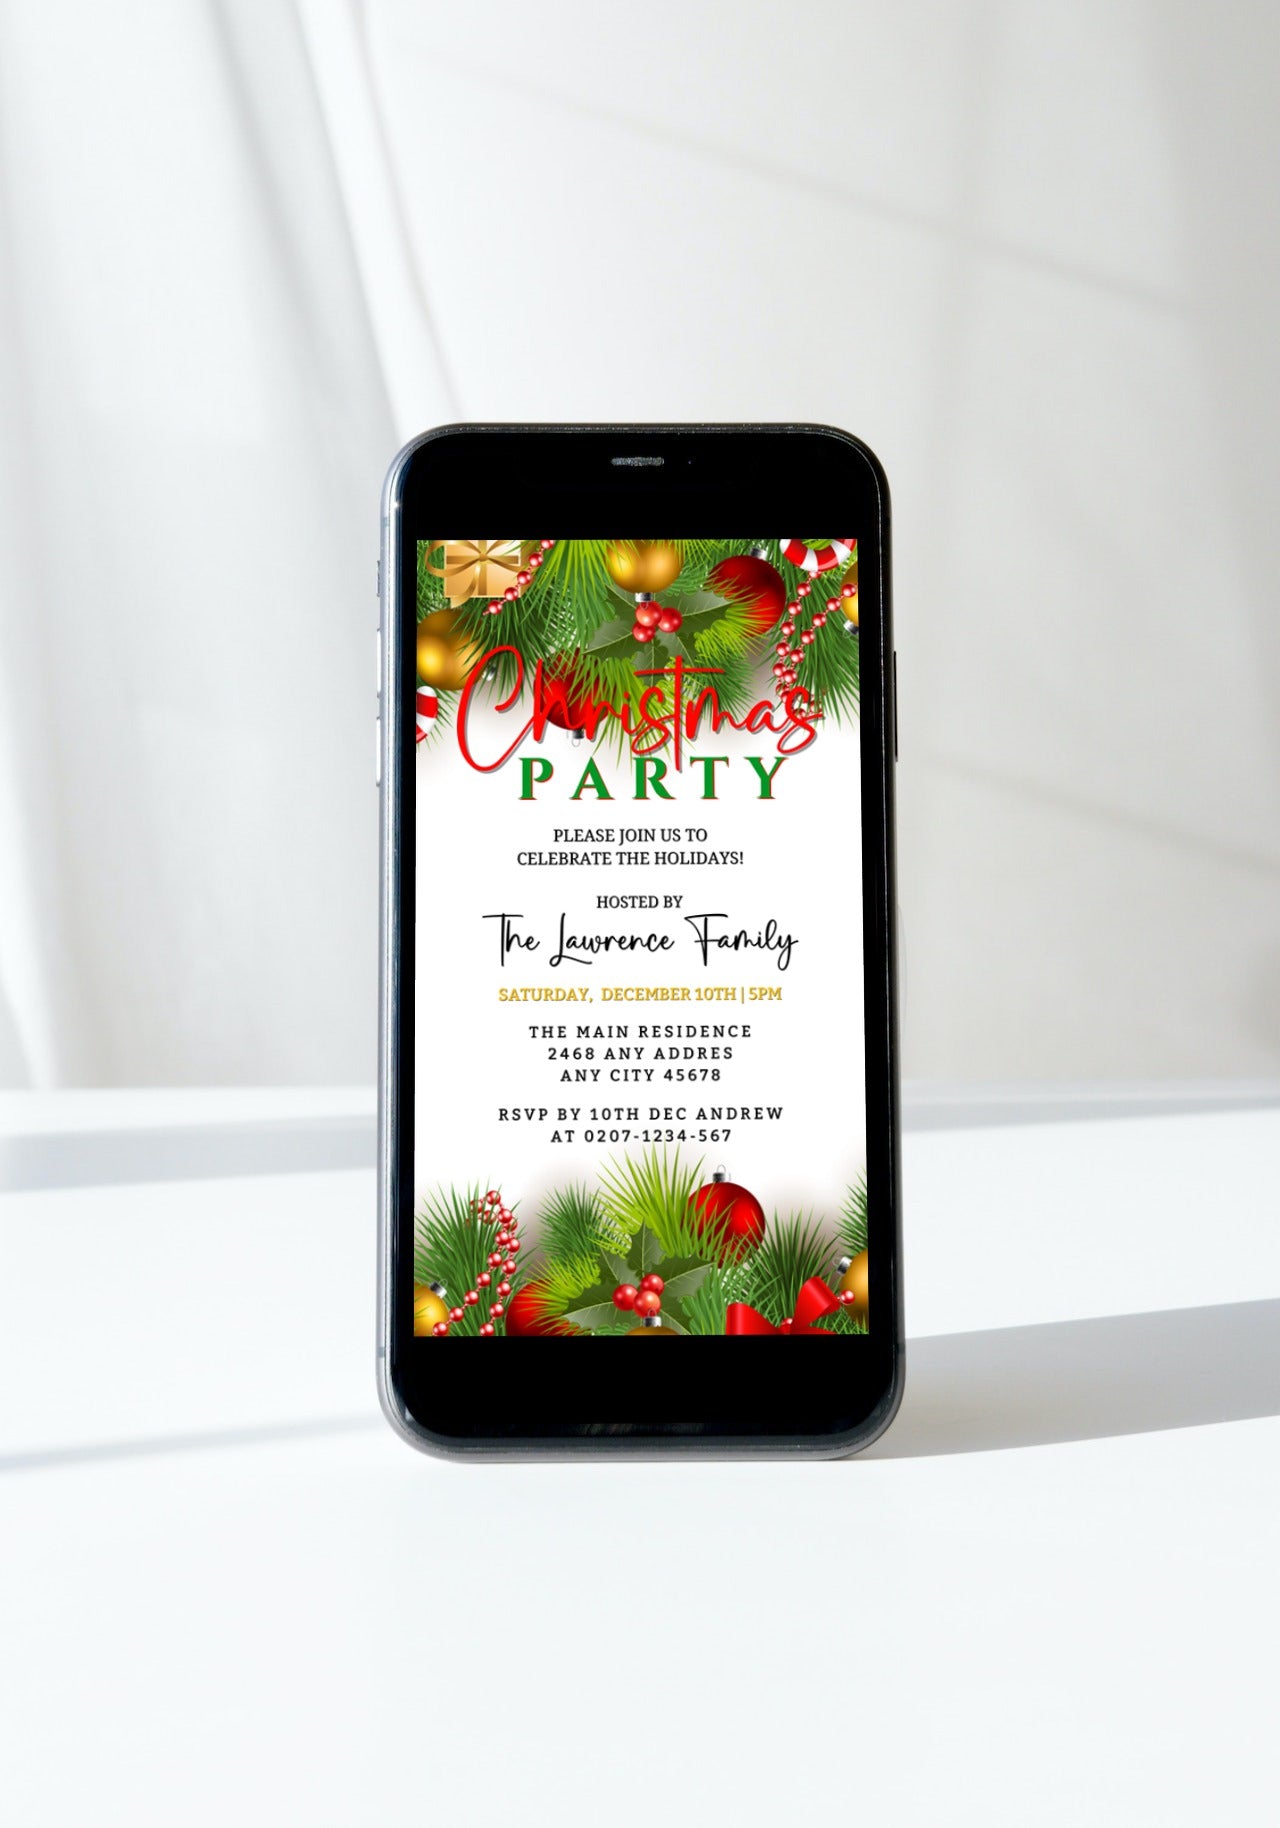 Cell phone displaying editable White Green Ornaments Christmas Party Invitation with customizable text, designed for use on smartphones, available from URCordiallyInvited.